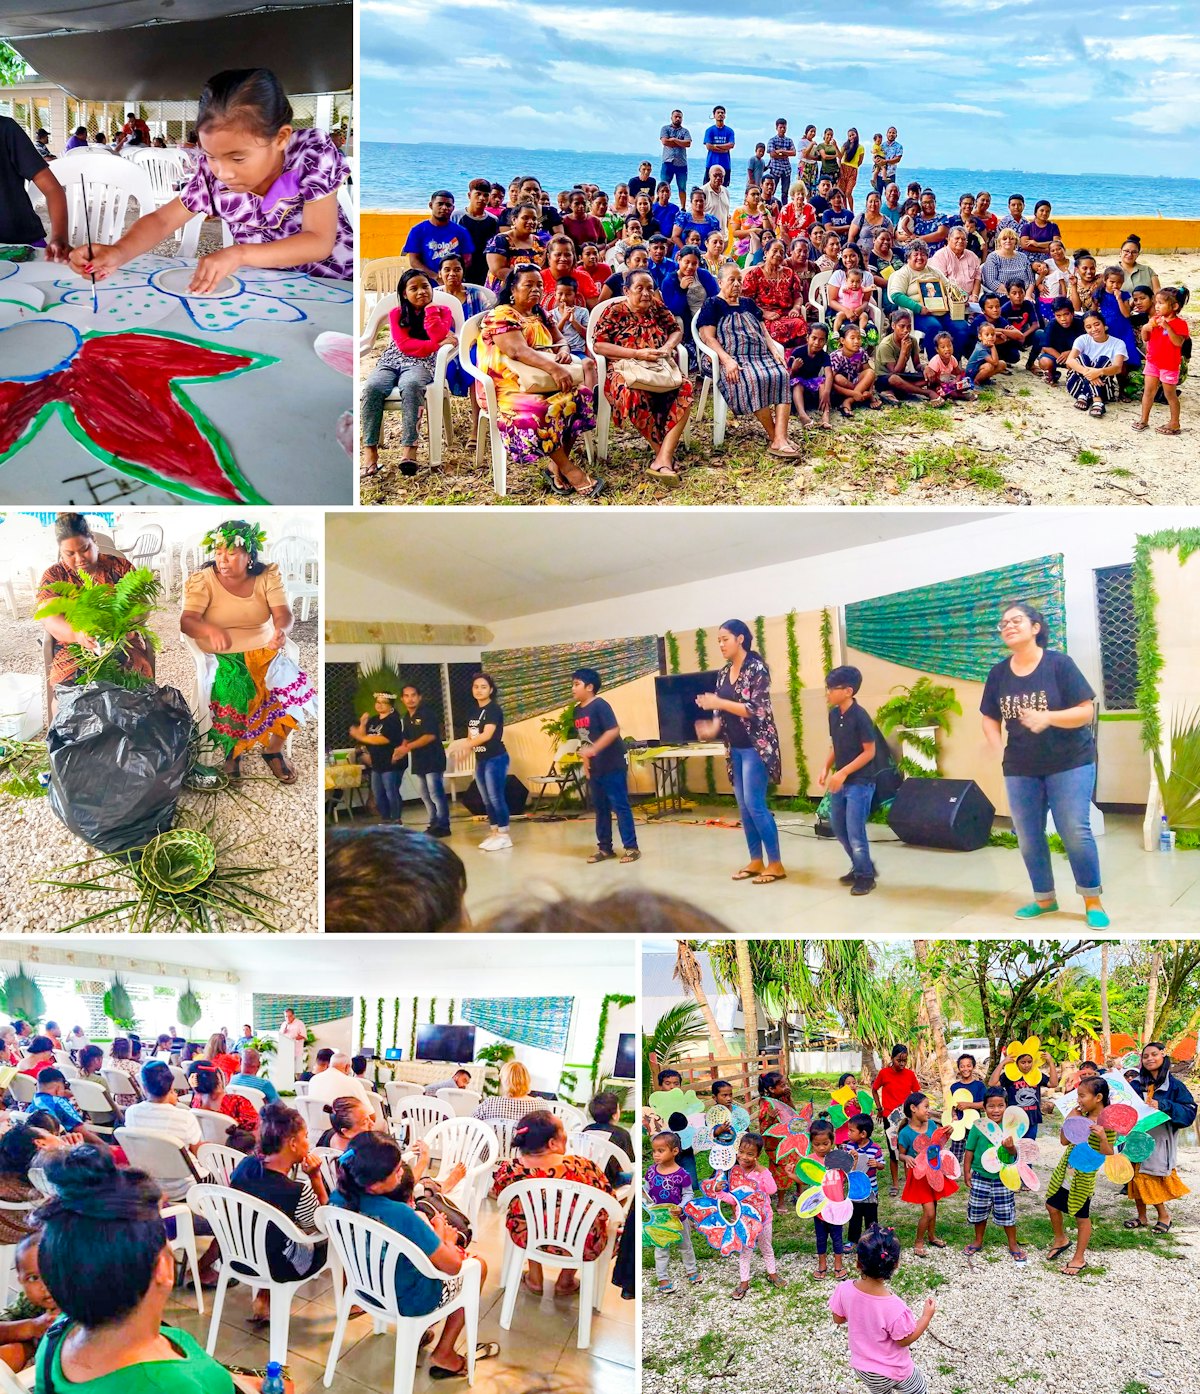 This conference in the Marshall Islands brought together participants of all ages to explore insights gained in Bahá’í community-building endeavors.